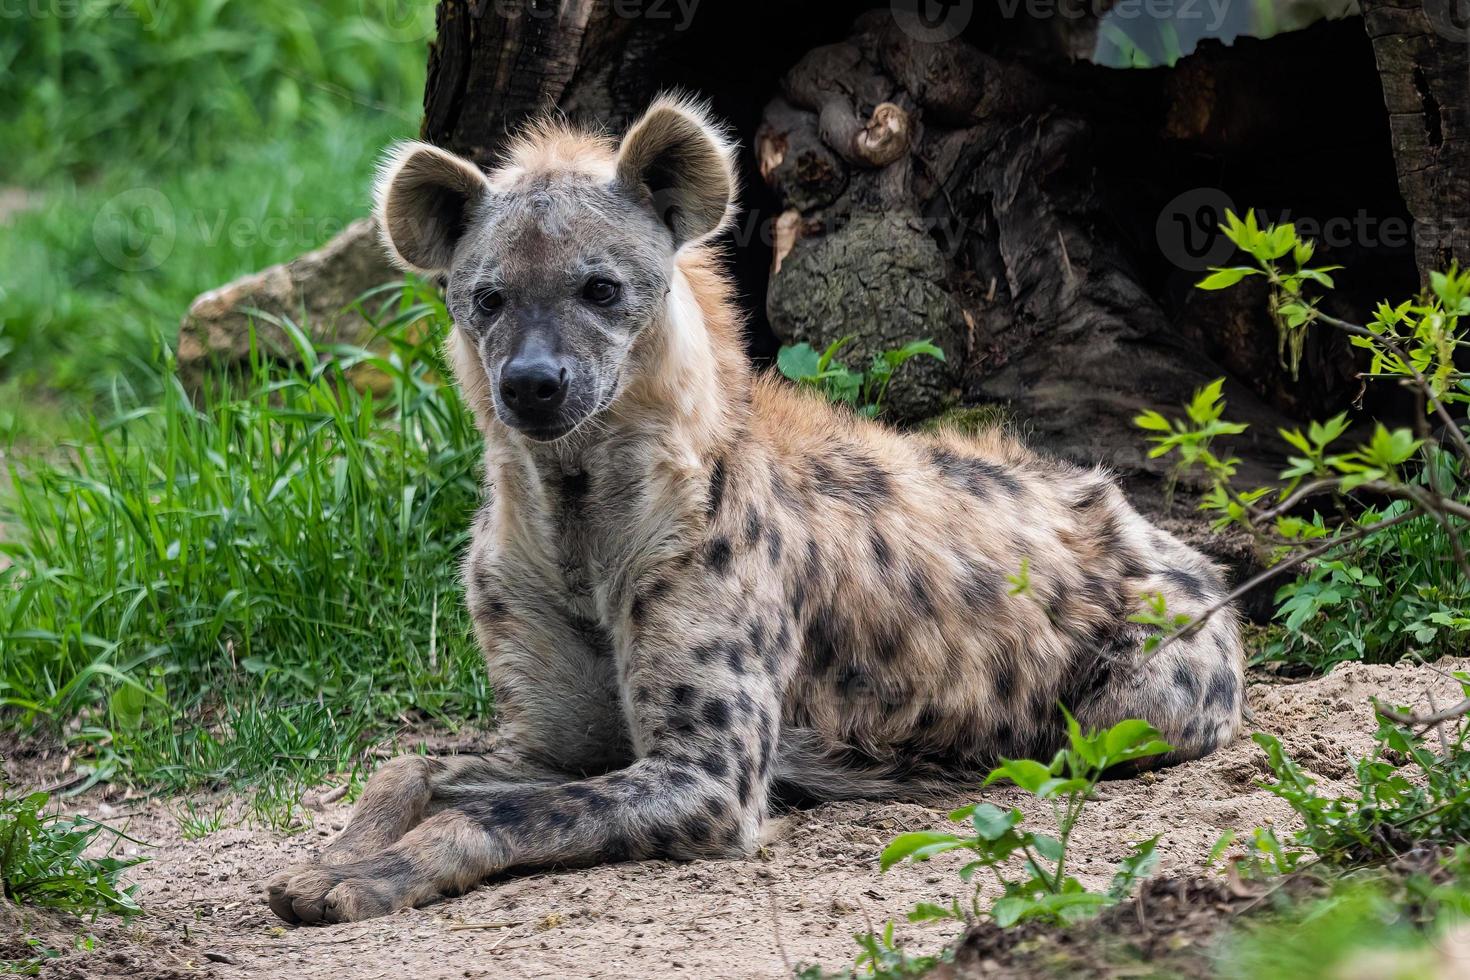 Spotted hyena lying in the grass. photo